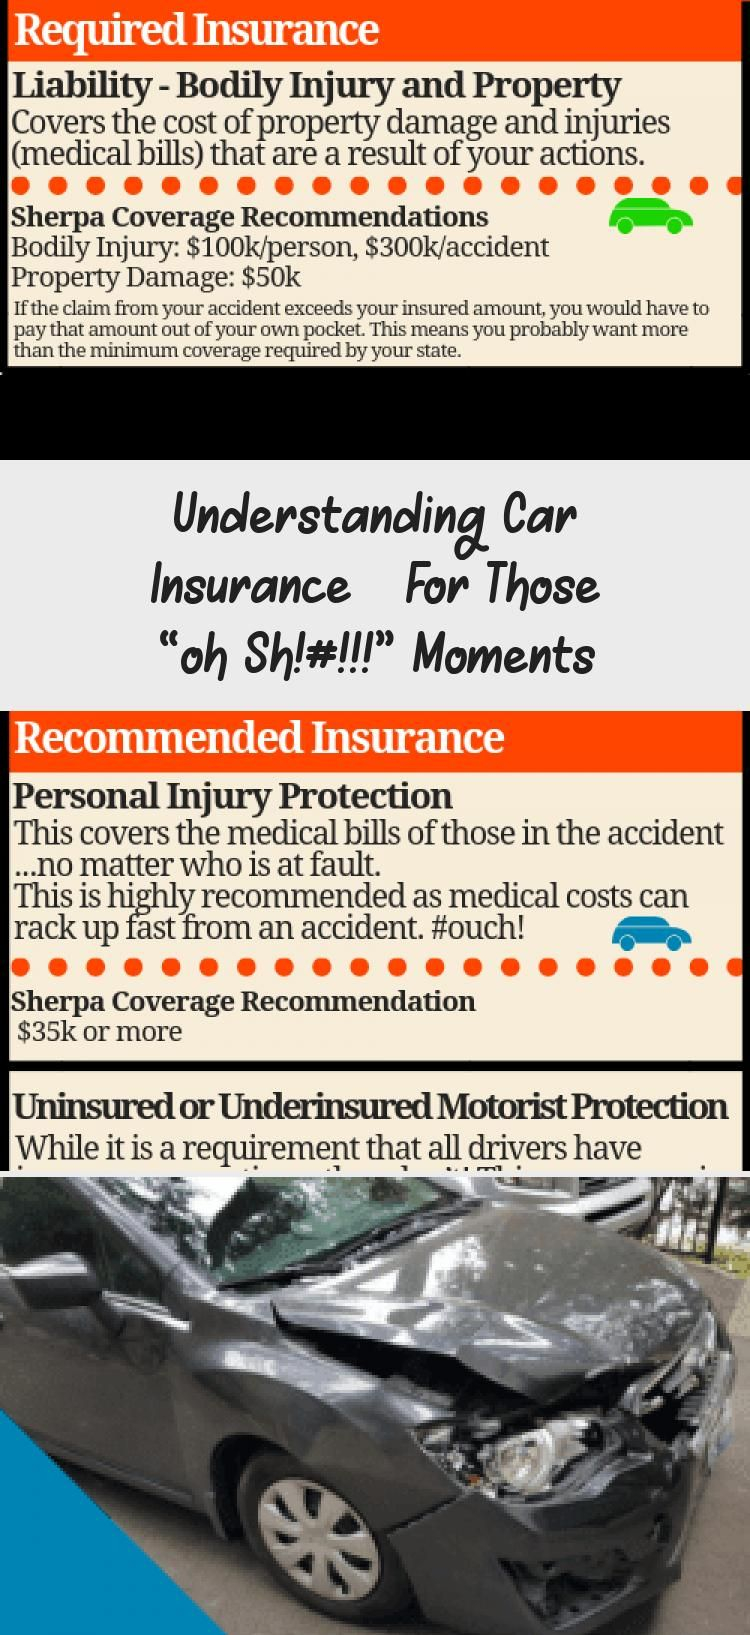 Understanding Car Insurance For Those Oh Sh Moments intended for dimensions 750 X 1635